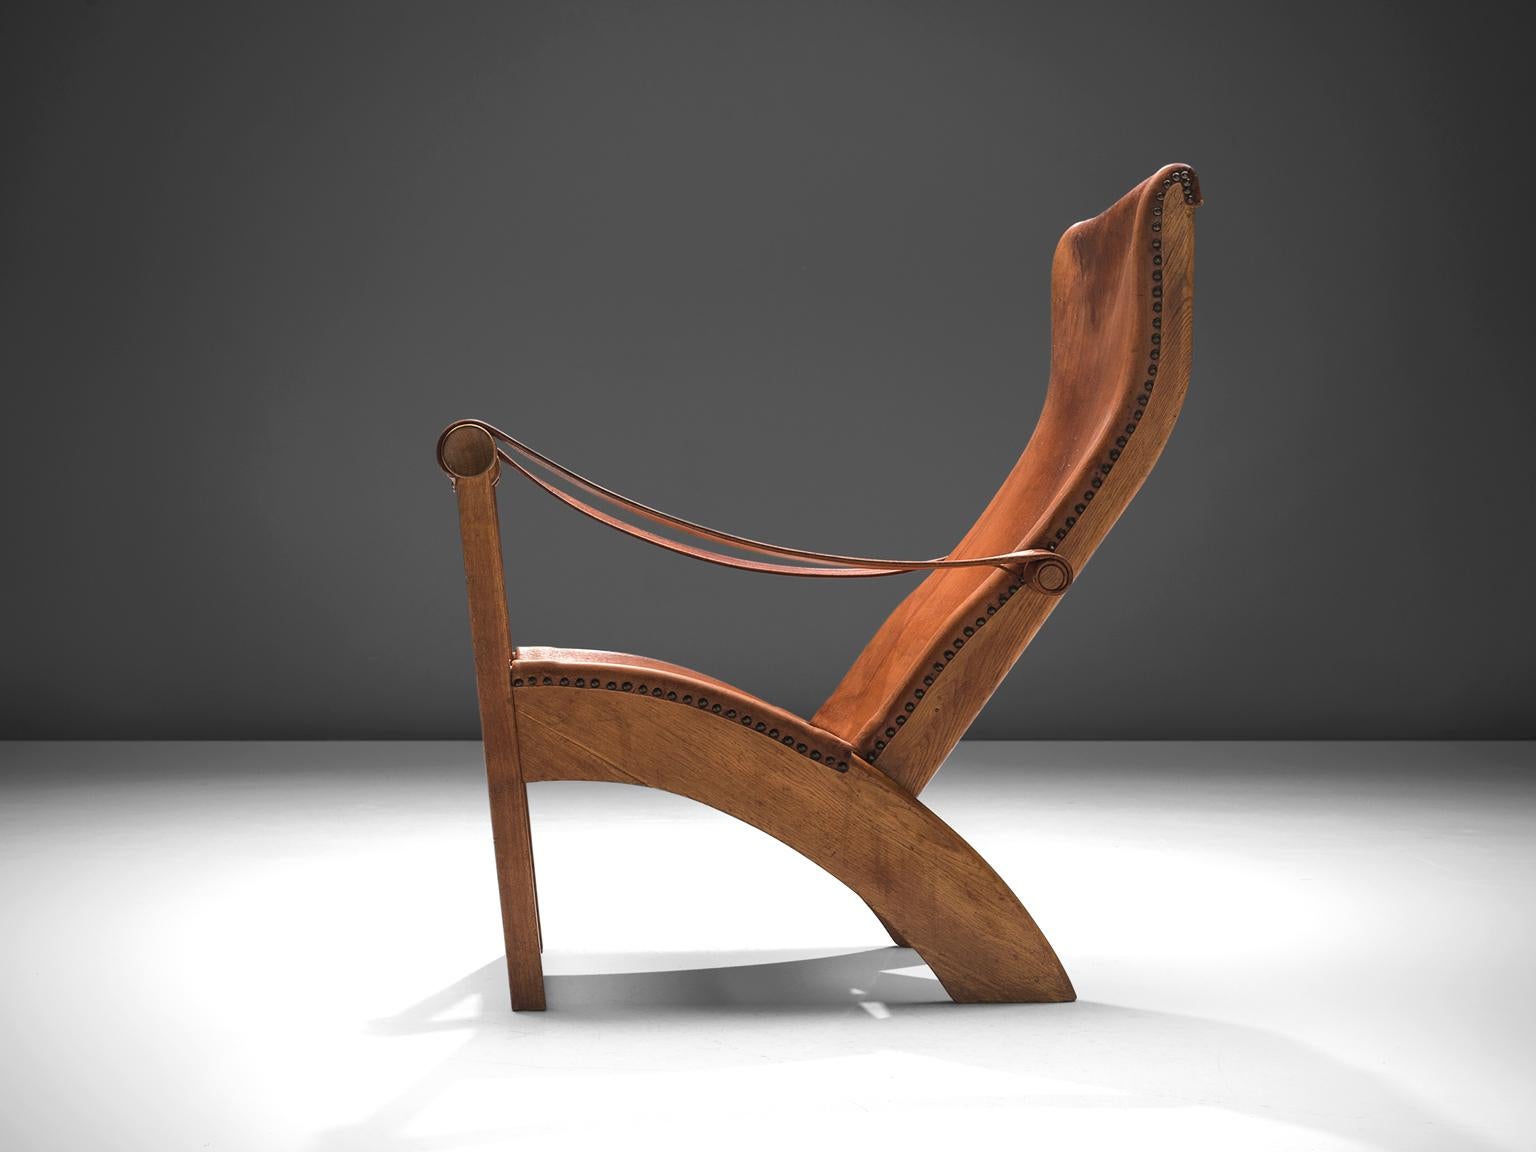 Mogens Voltelen for cabinetmaker Niels Vodder, lounge chair model 'Københavnerstolen', beech and cognac leather, Denmark, 1936. 

This Copenhagen lounge chair is designed by Mogens Voltelen. Classic early edition in which the armrests are attached